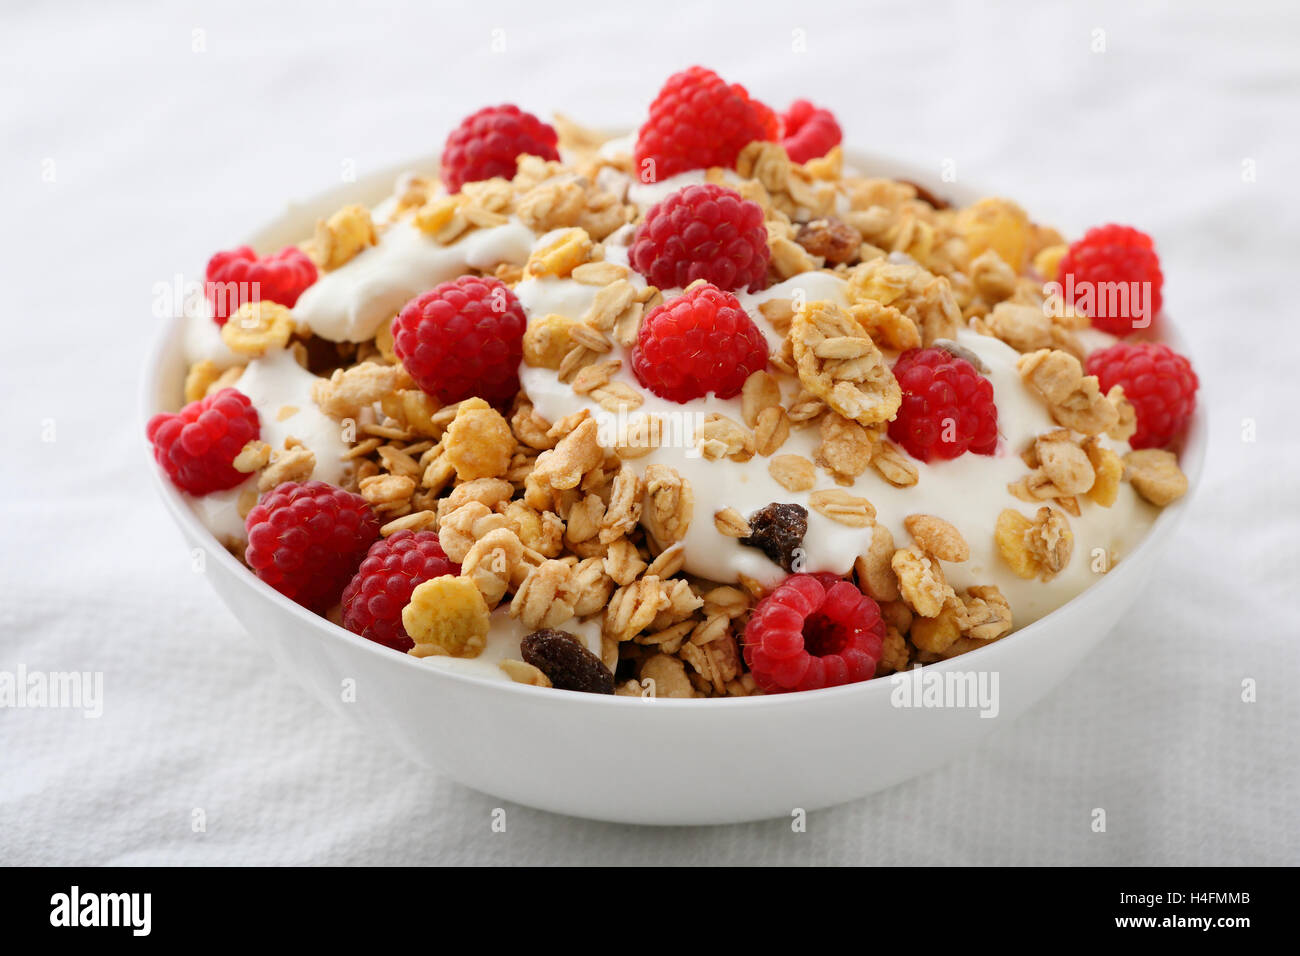 Healthy breakfast with berry, food closeup Stock Photo